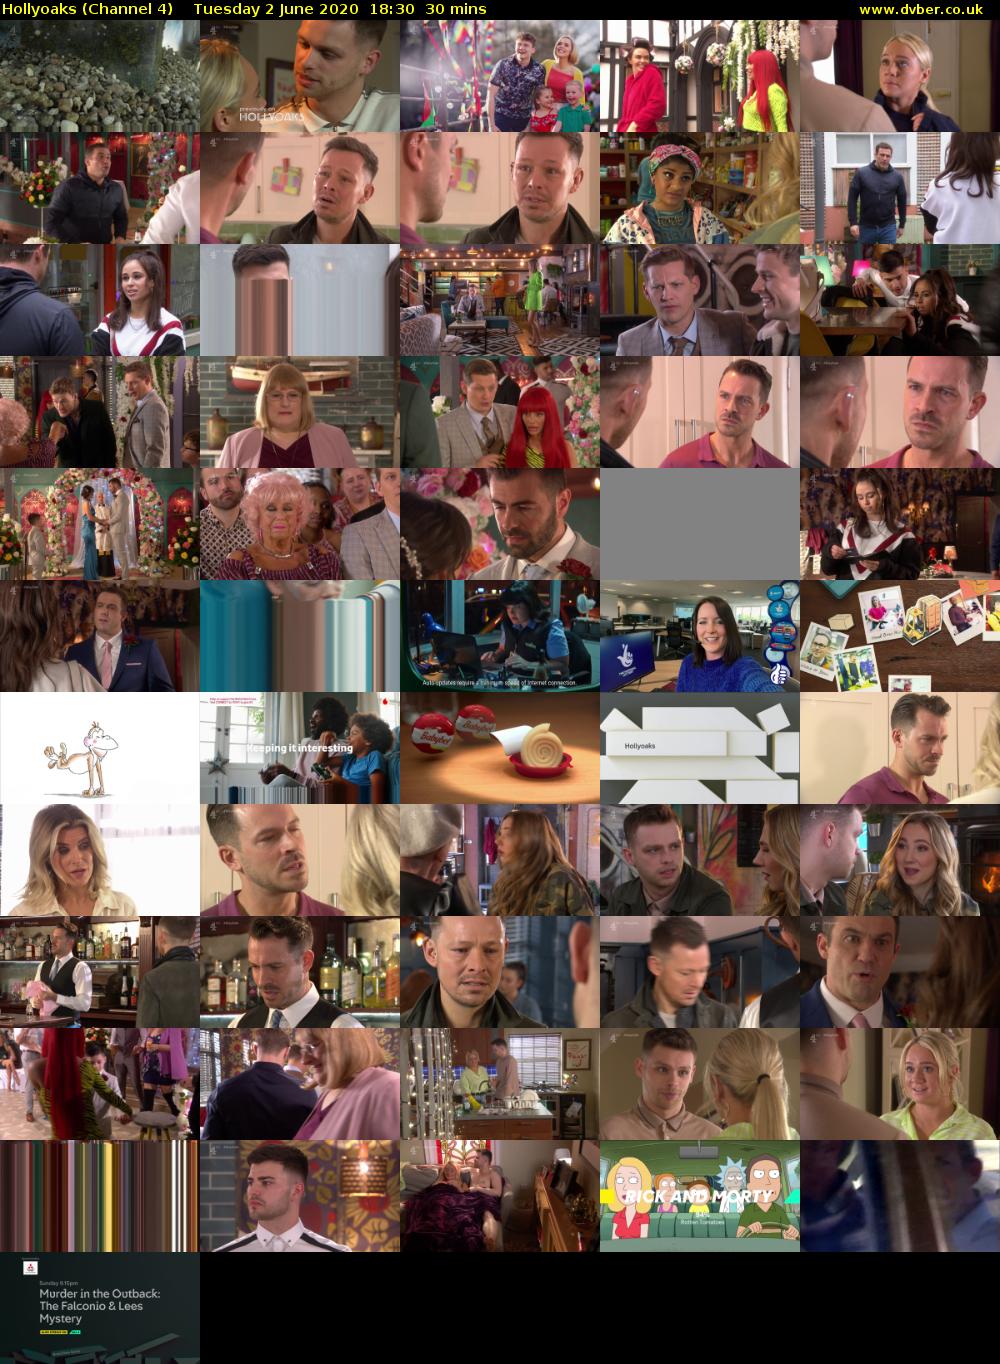 Hollyoaks (Channel 4) Tuesday 2 June 2020 18:30 - 19:00